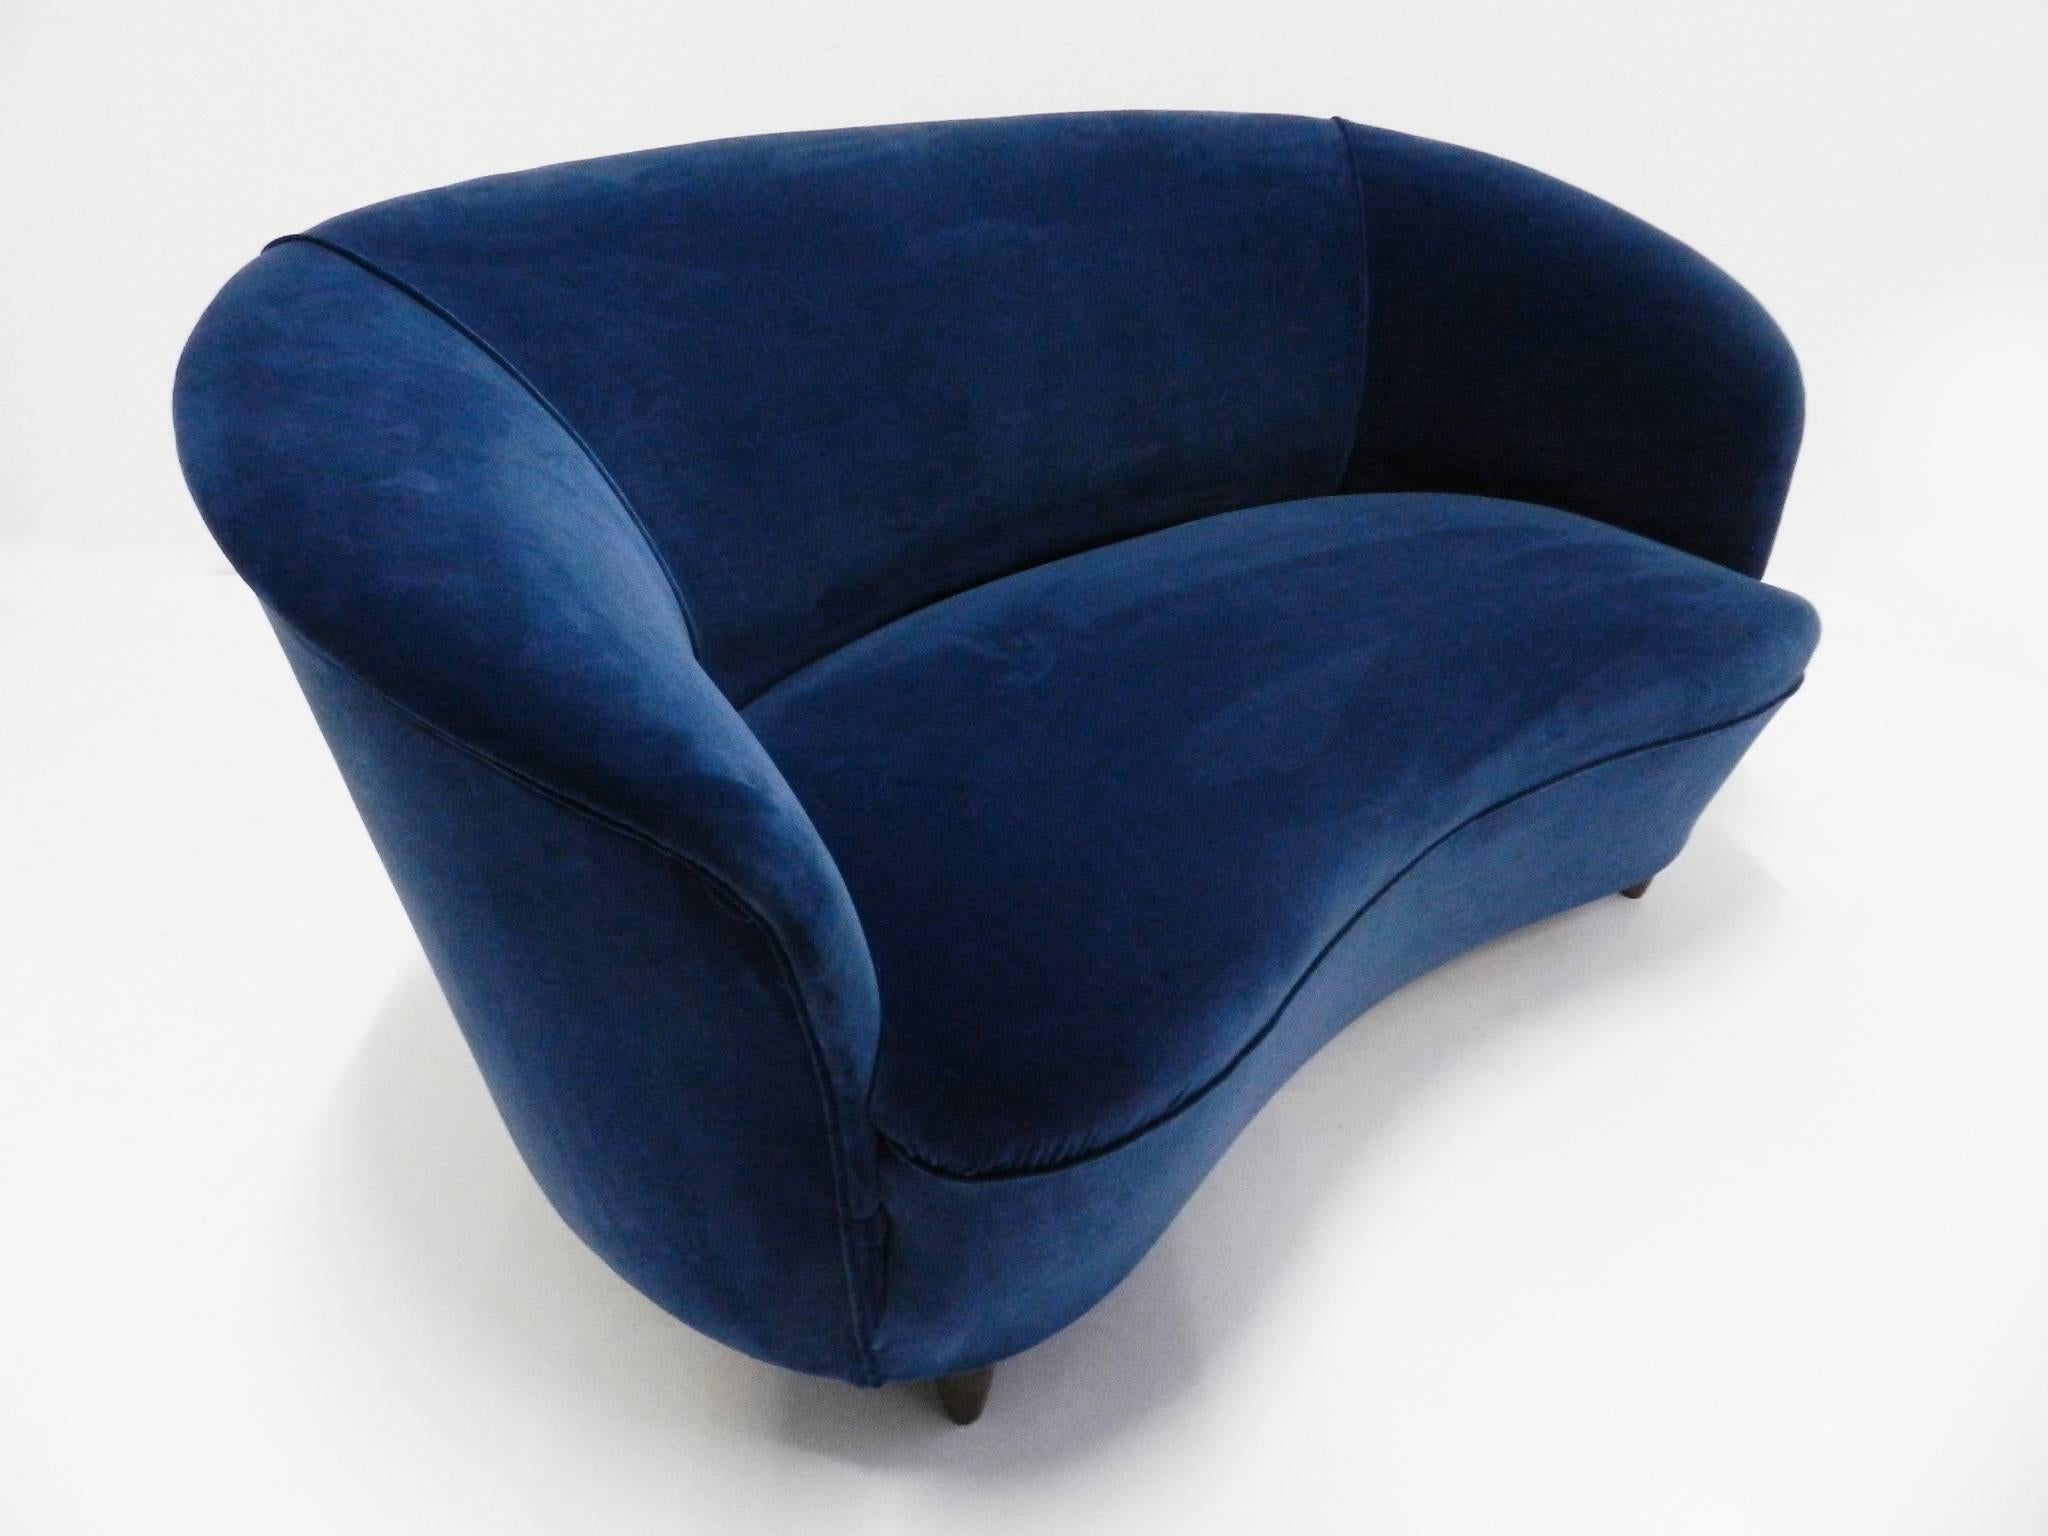 Small sofa totally new upholstery and cover in new blue velvet, legs in wood

Dimensions: 
160 x 85 x seating HT. 42 cm
total HT. 79 cm